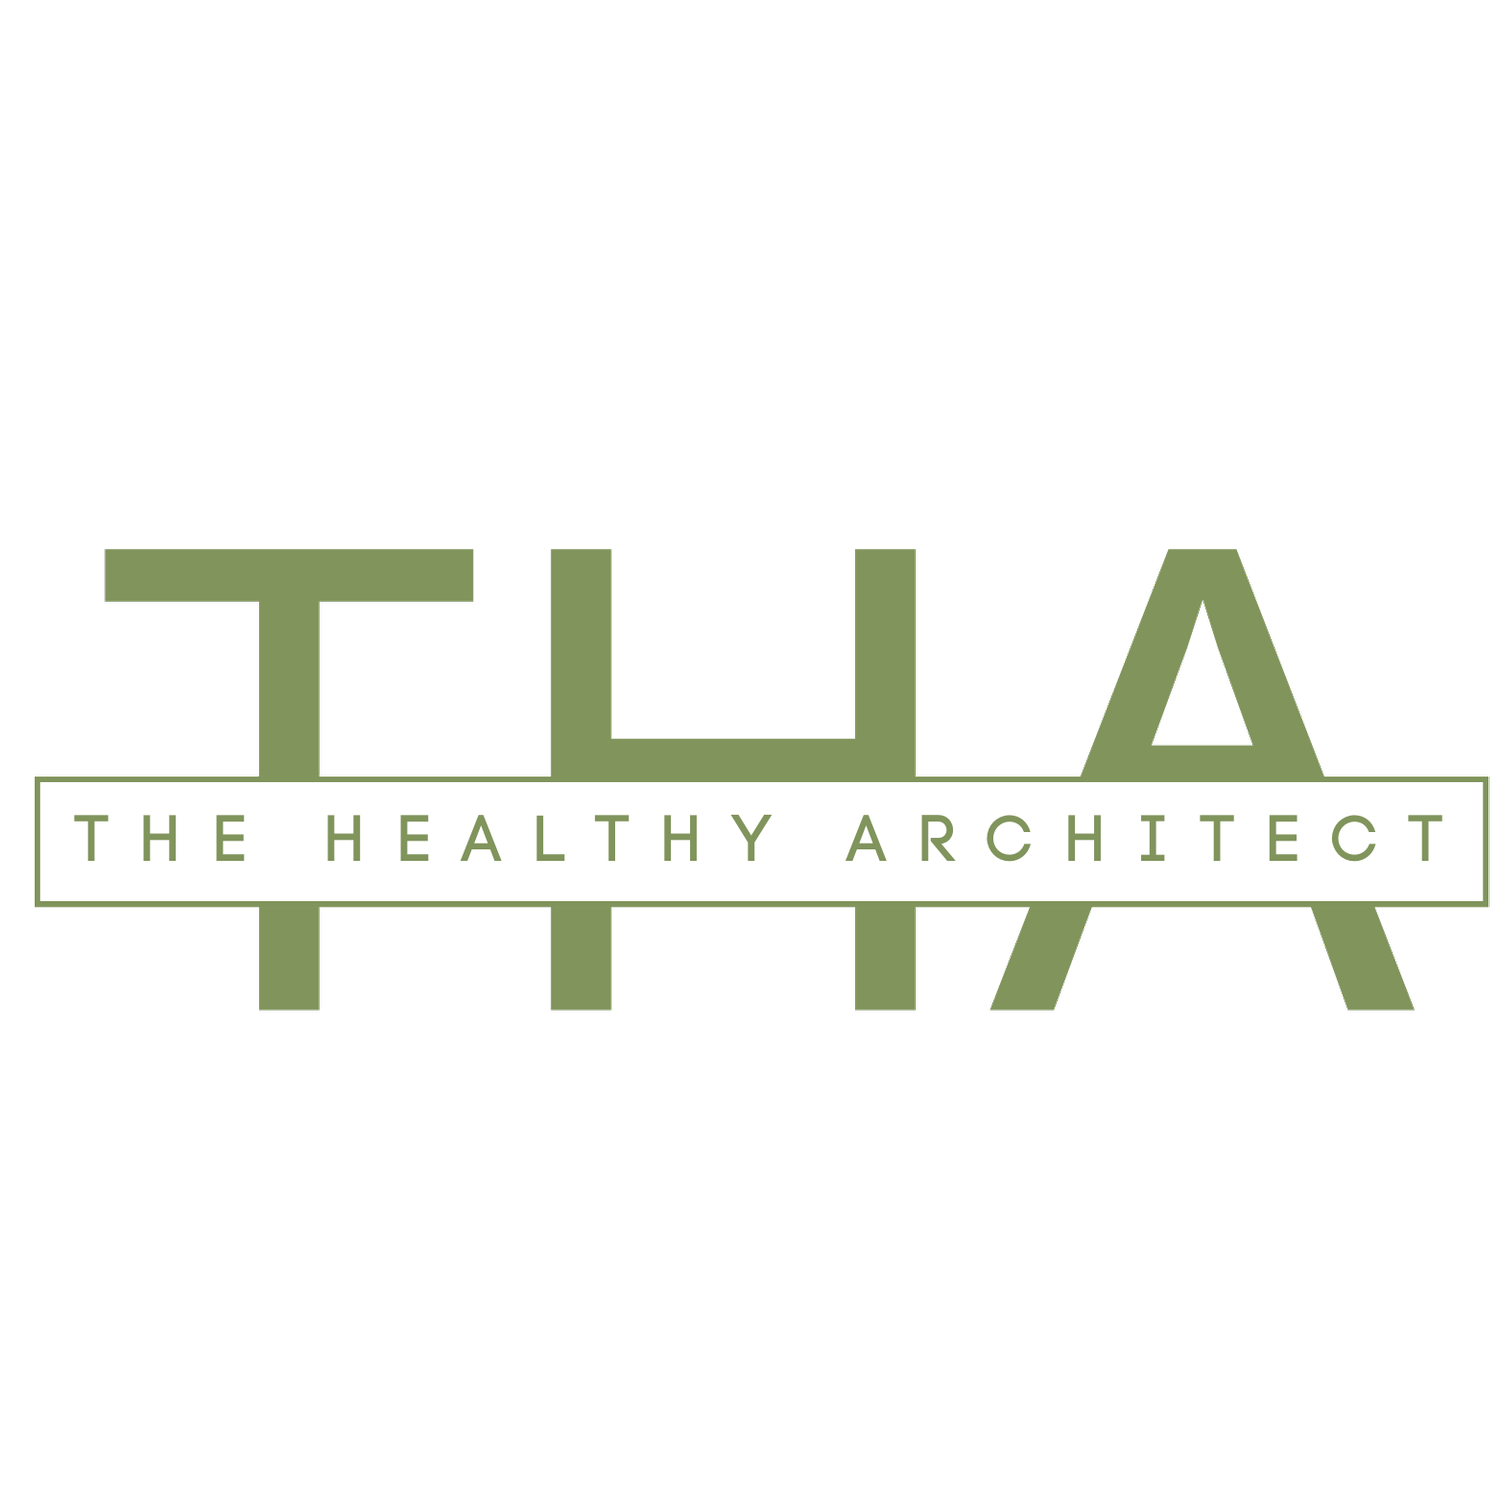 The Healthy Architect